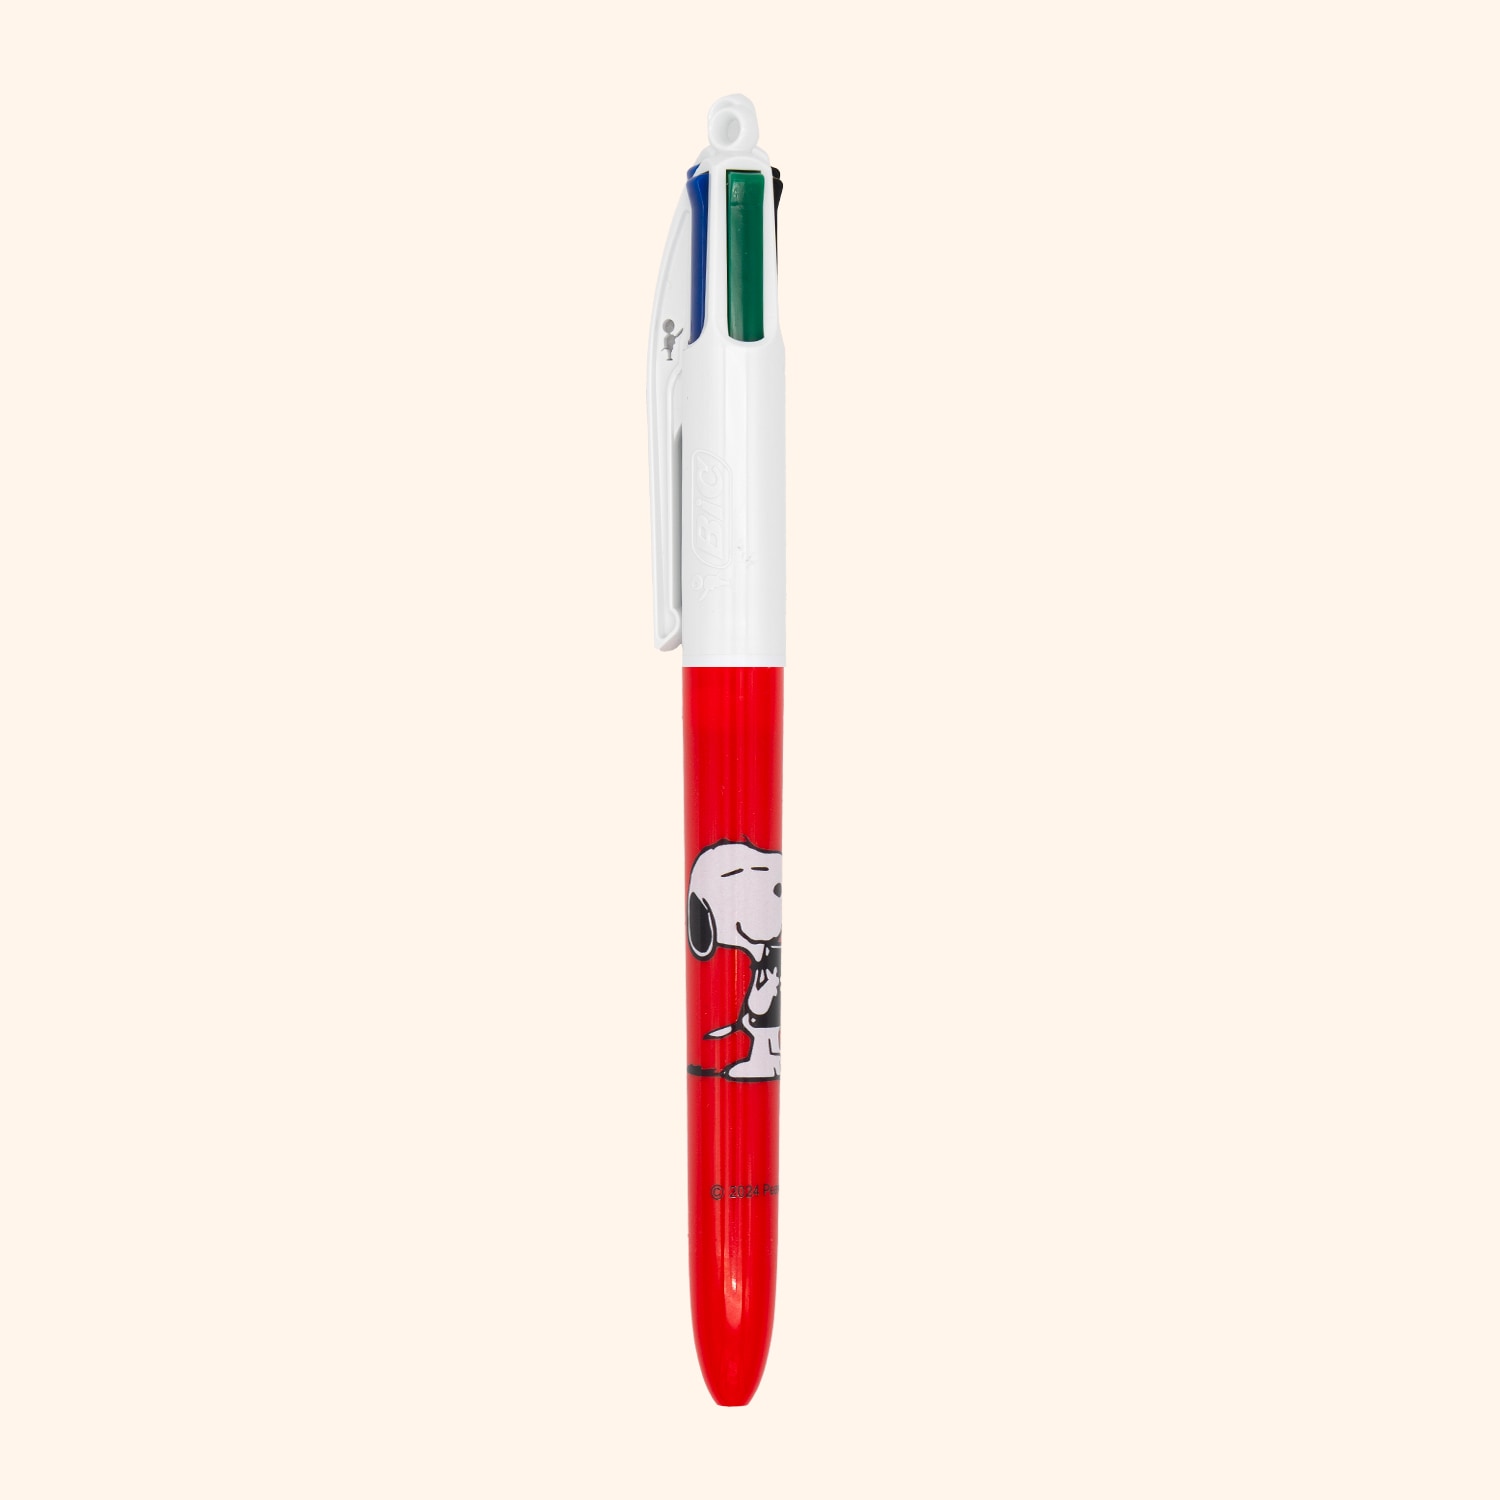 Stylo Bic 4 couleurs Snoopy